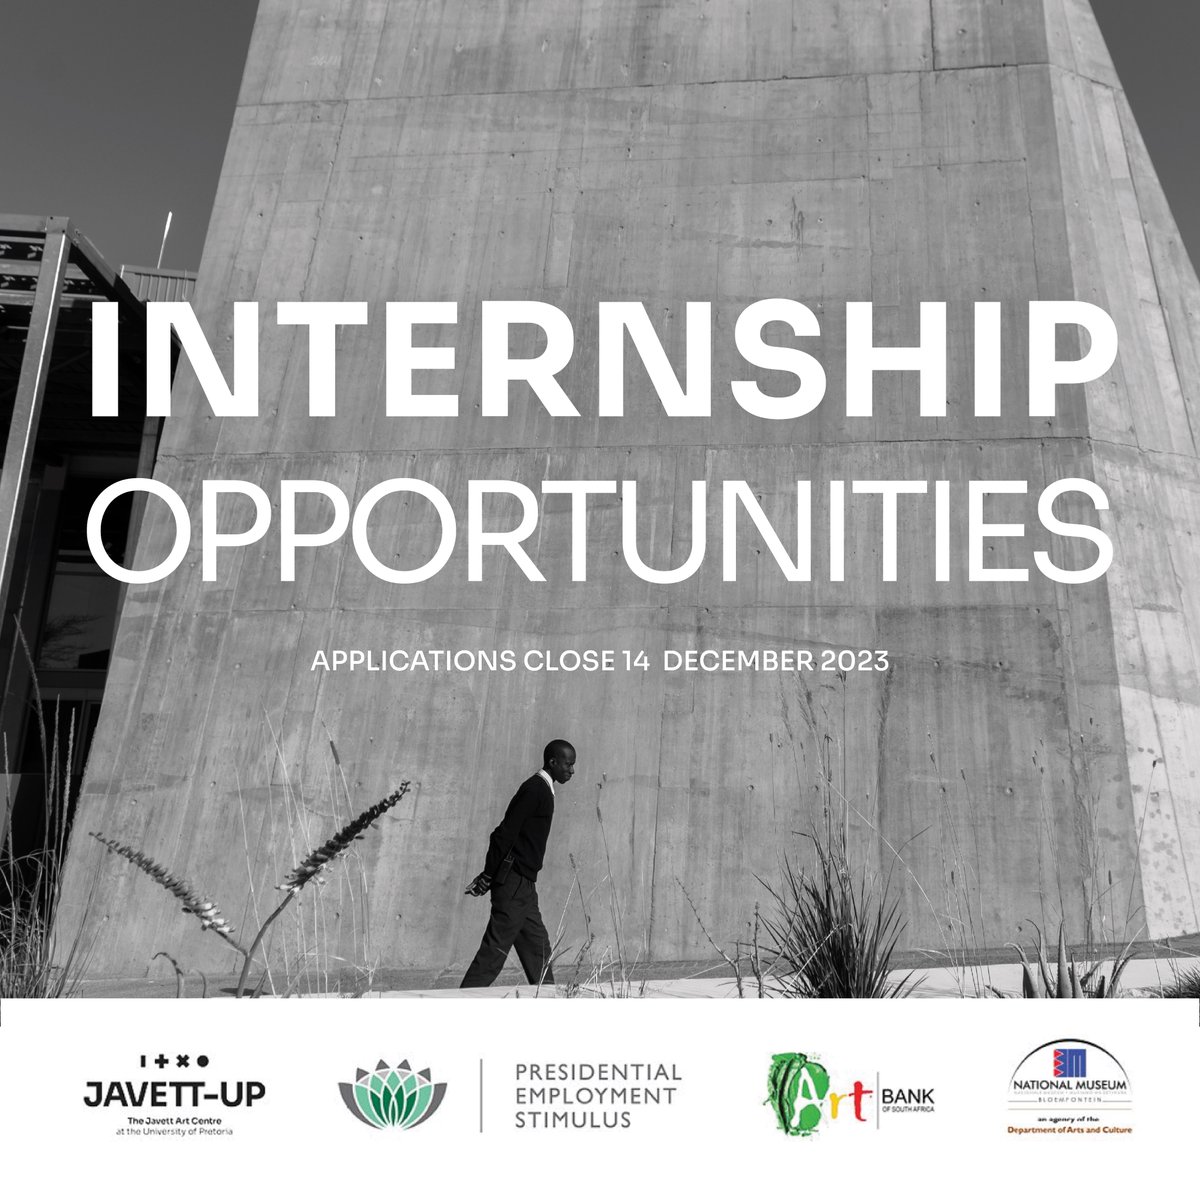 We have Internship Opportunities: · Arts Administration & Fundraising Support · Event Management & Project Coordination · Graphic Design & Social Media · Arts Education & Public Programming This Work-Based Experience programme is coordinated by @artbankSA as part of the #PESP4